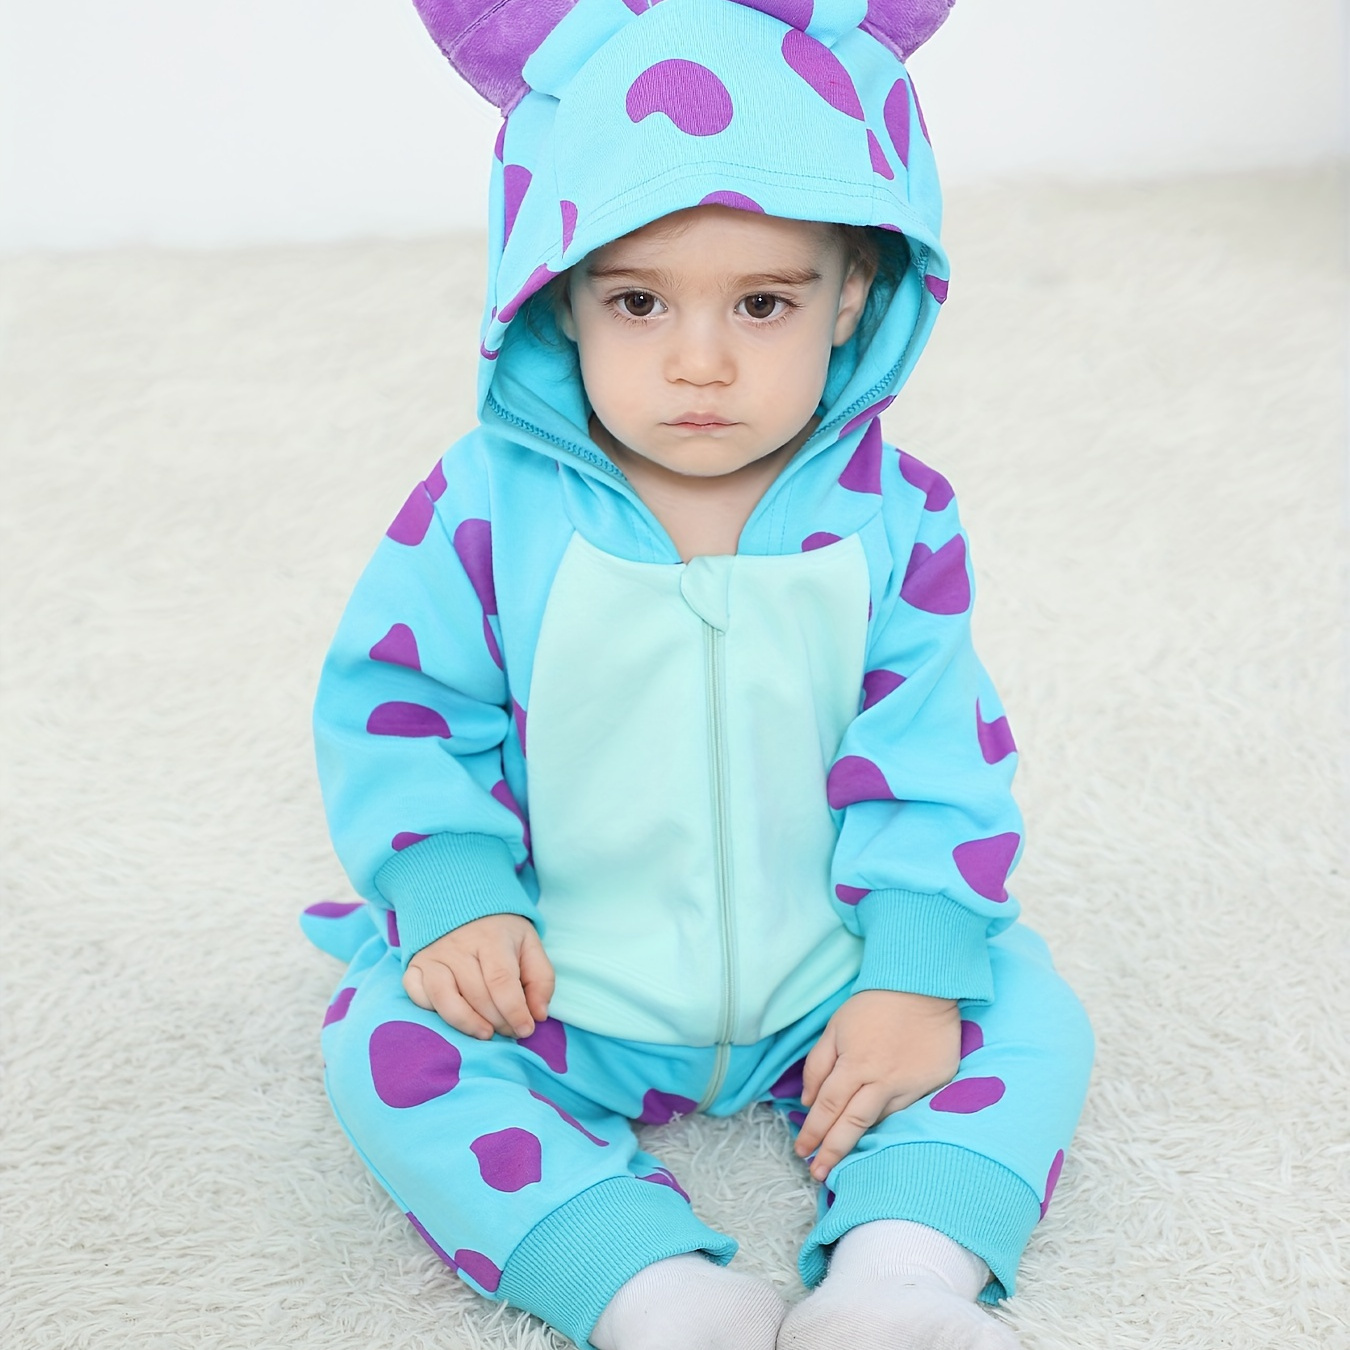 

Unisex Baby Lovely Monster Themed Hooded Pure Cotton Bodysuit, Casual Zip Up Long Sleeve Onesie, Baby Clothing